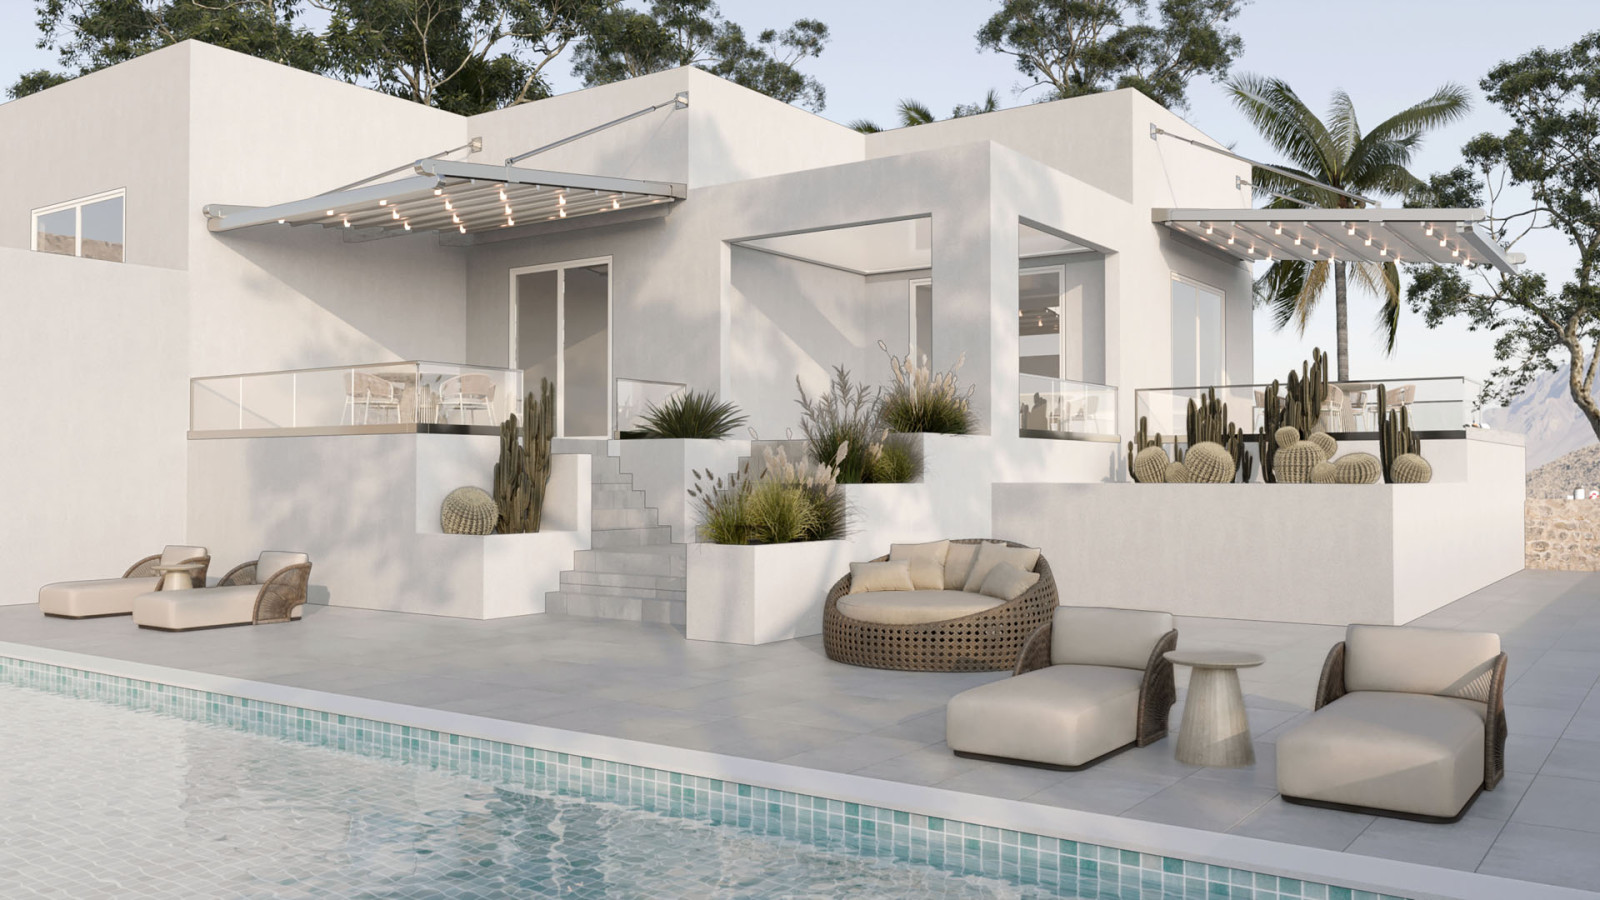 Image of a stylish house with a pool, outdoor furniture, and fabric pergolas with tilted roof